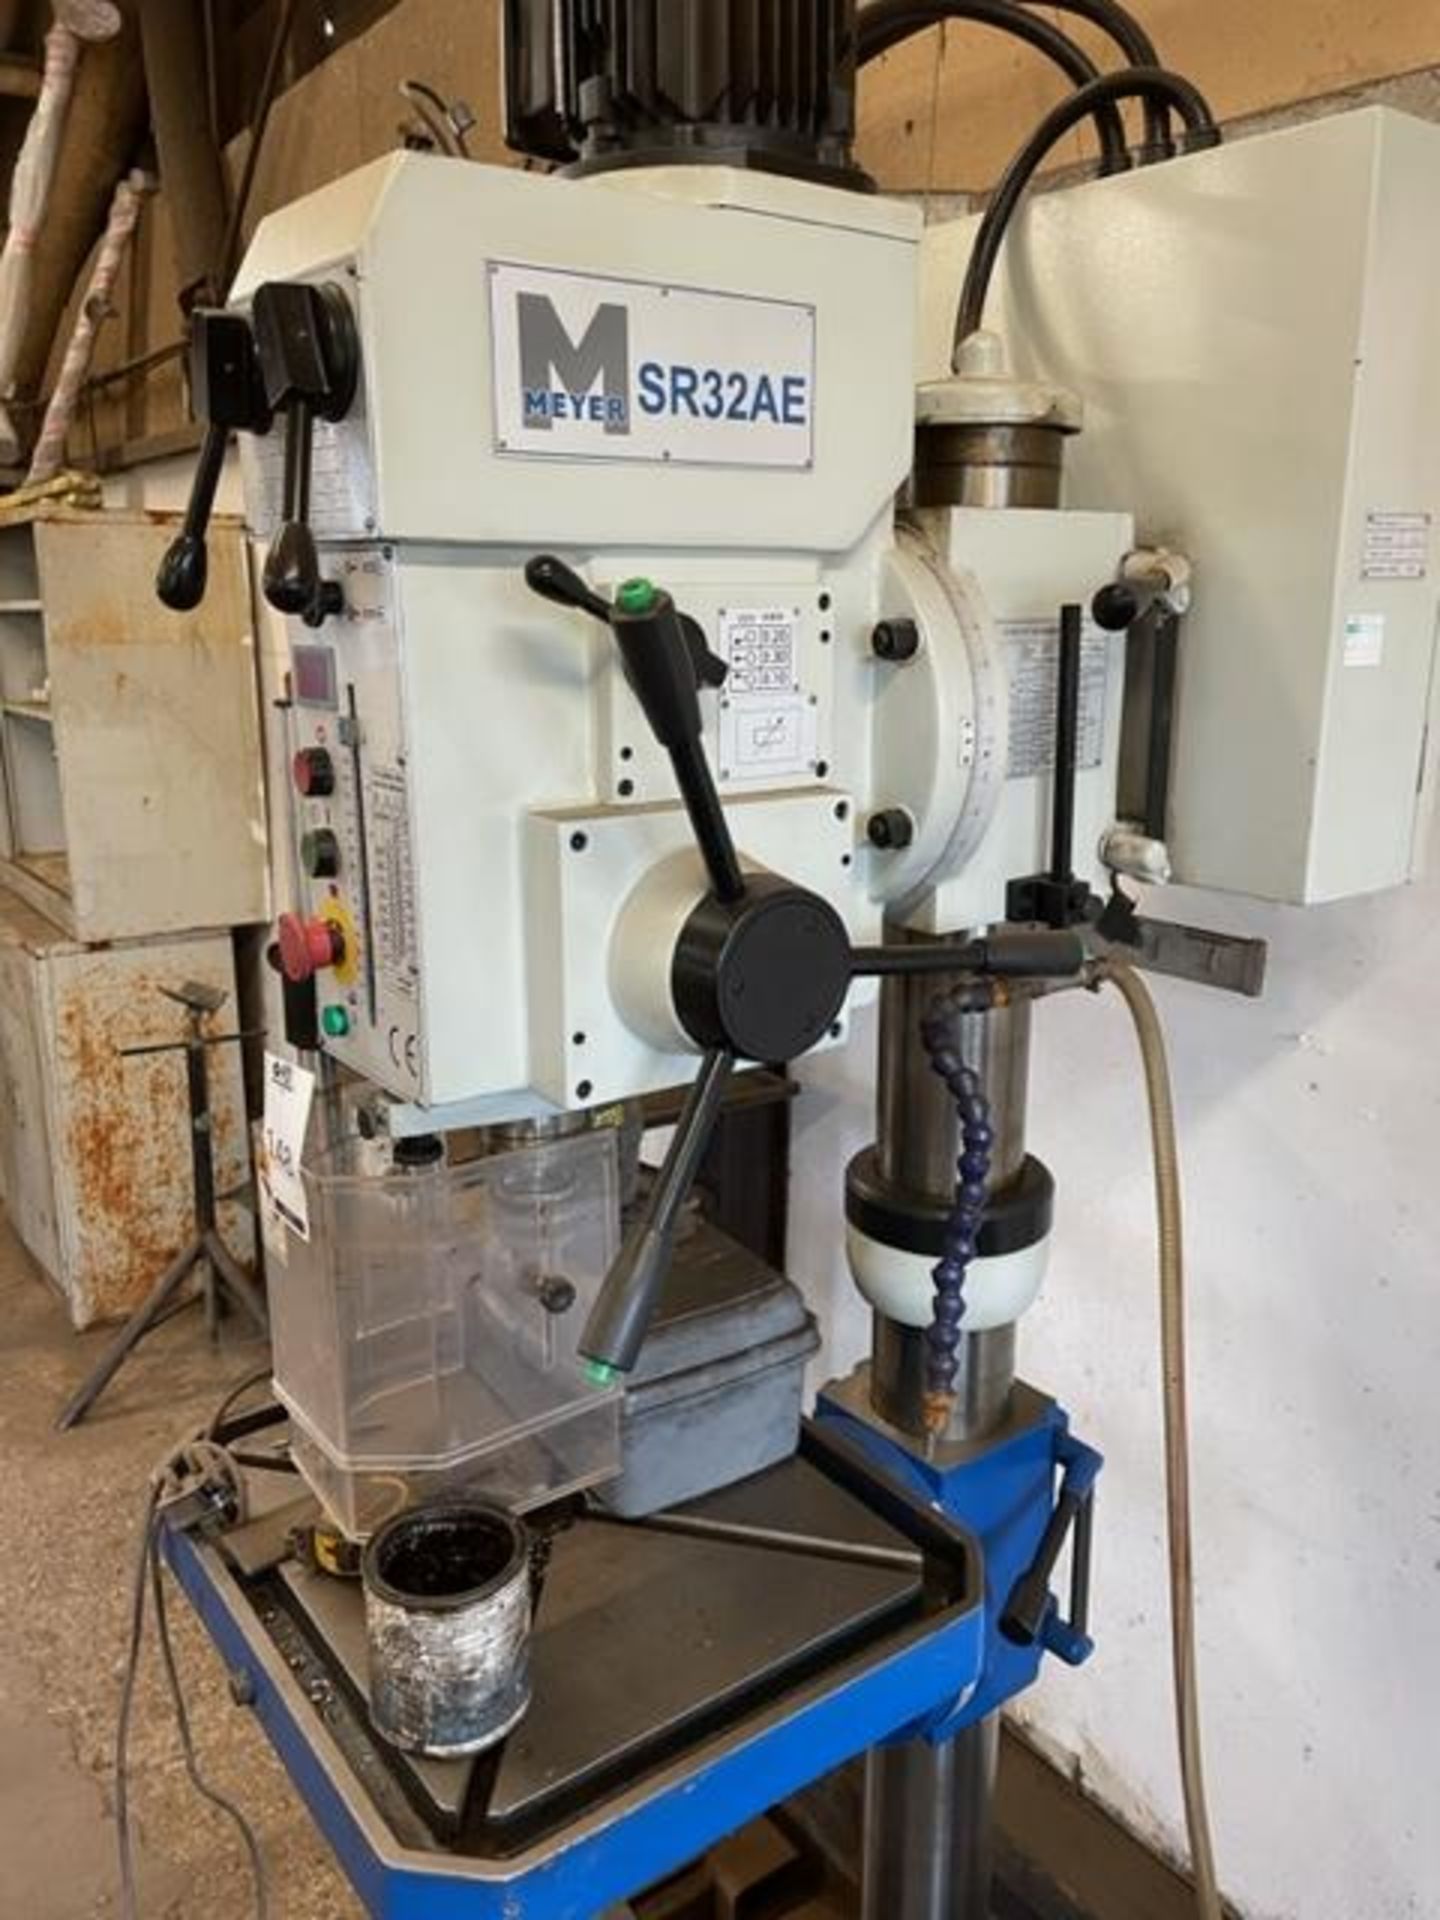 2020 Meyer SR32AE Vertical Drilling Machine 32mm Max Capacity,0 Serial Number C212222 (Location: - Image 3 of 4